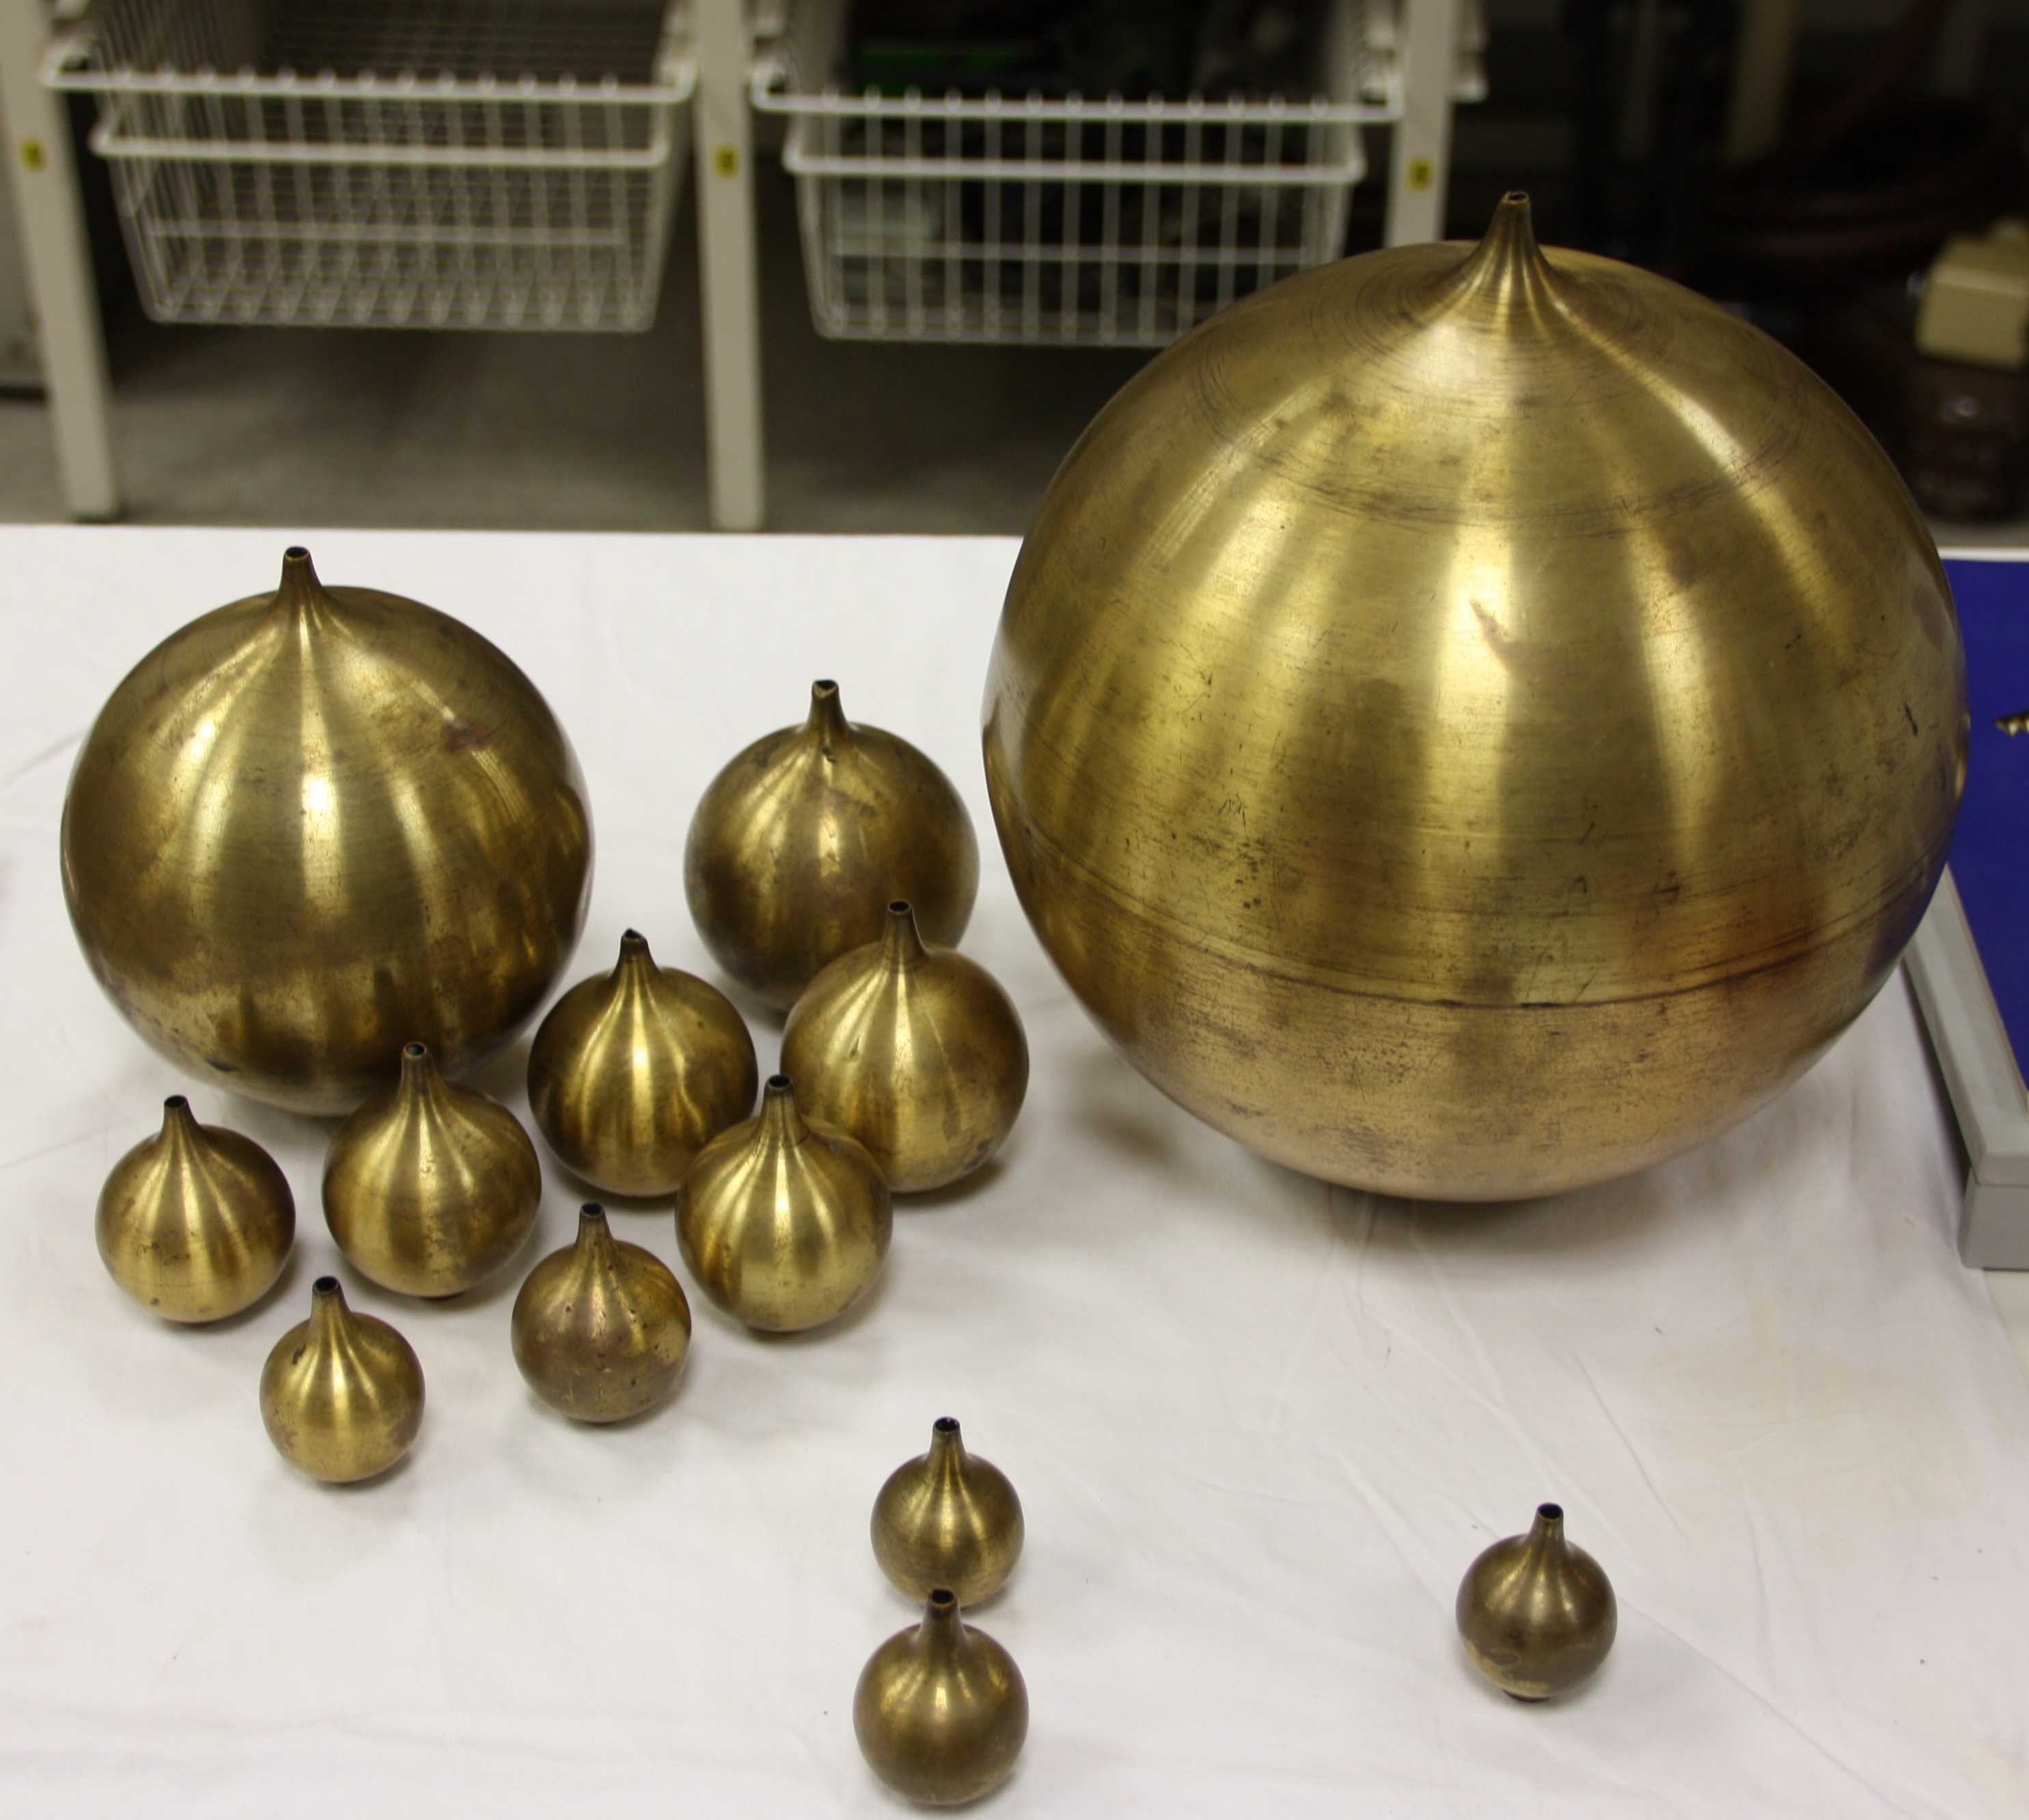 set of Koenig brass resonators in the Physiology of Hearing Collection in the Department of Physiology, Charité campus